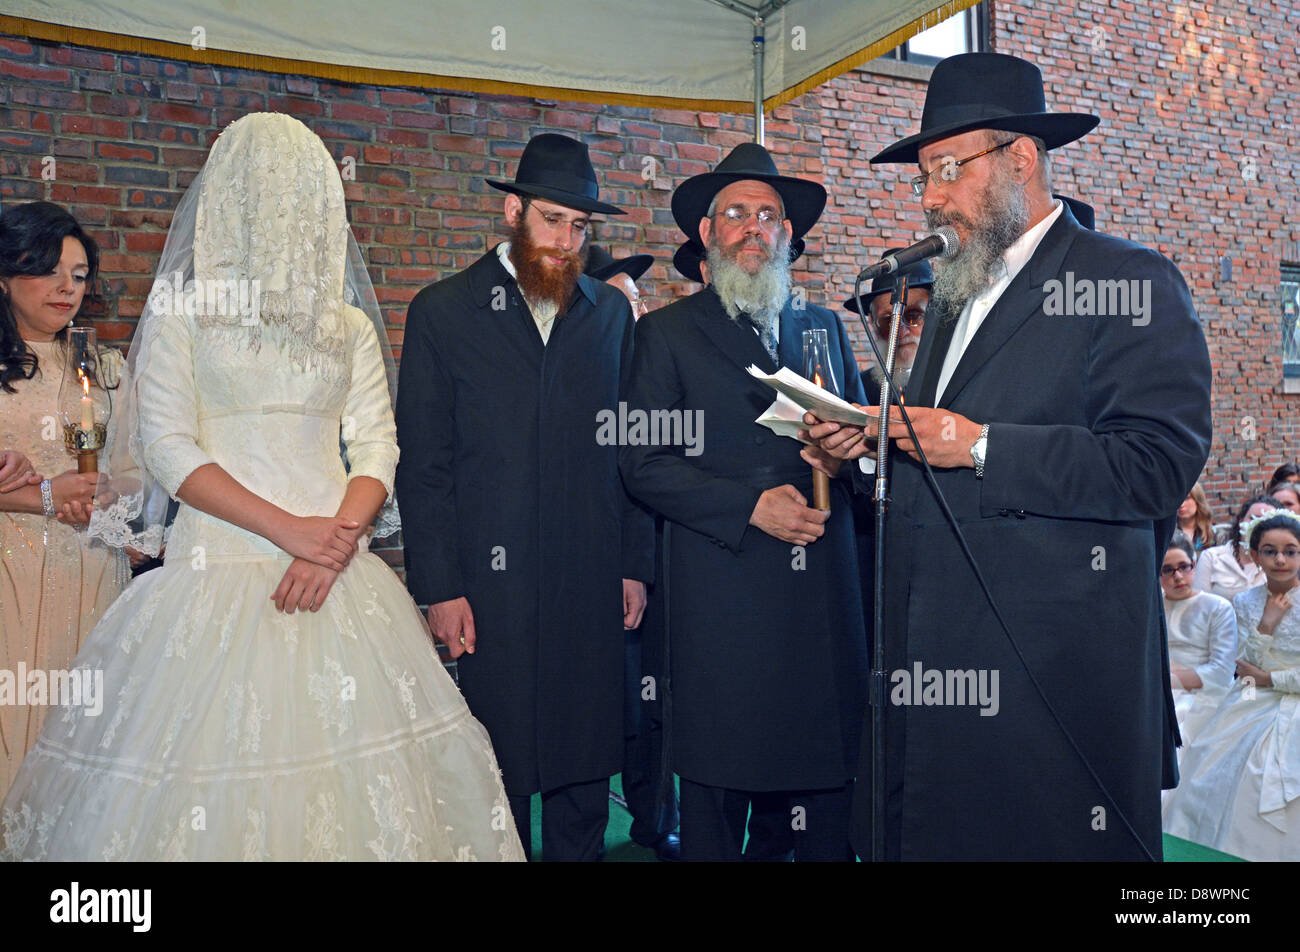 A orthodox religious Jewish bride and groom under a canopy